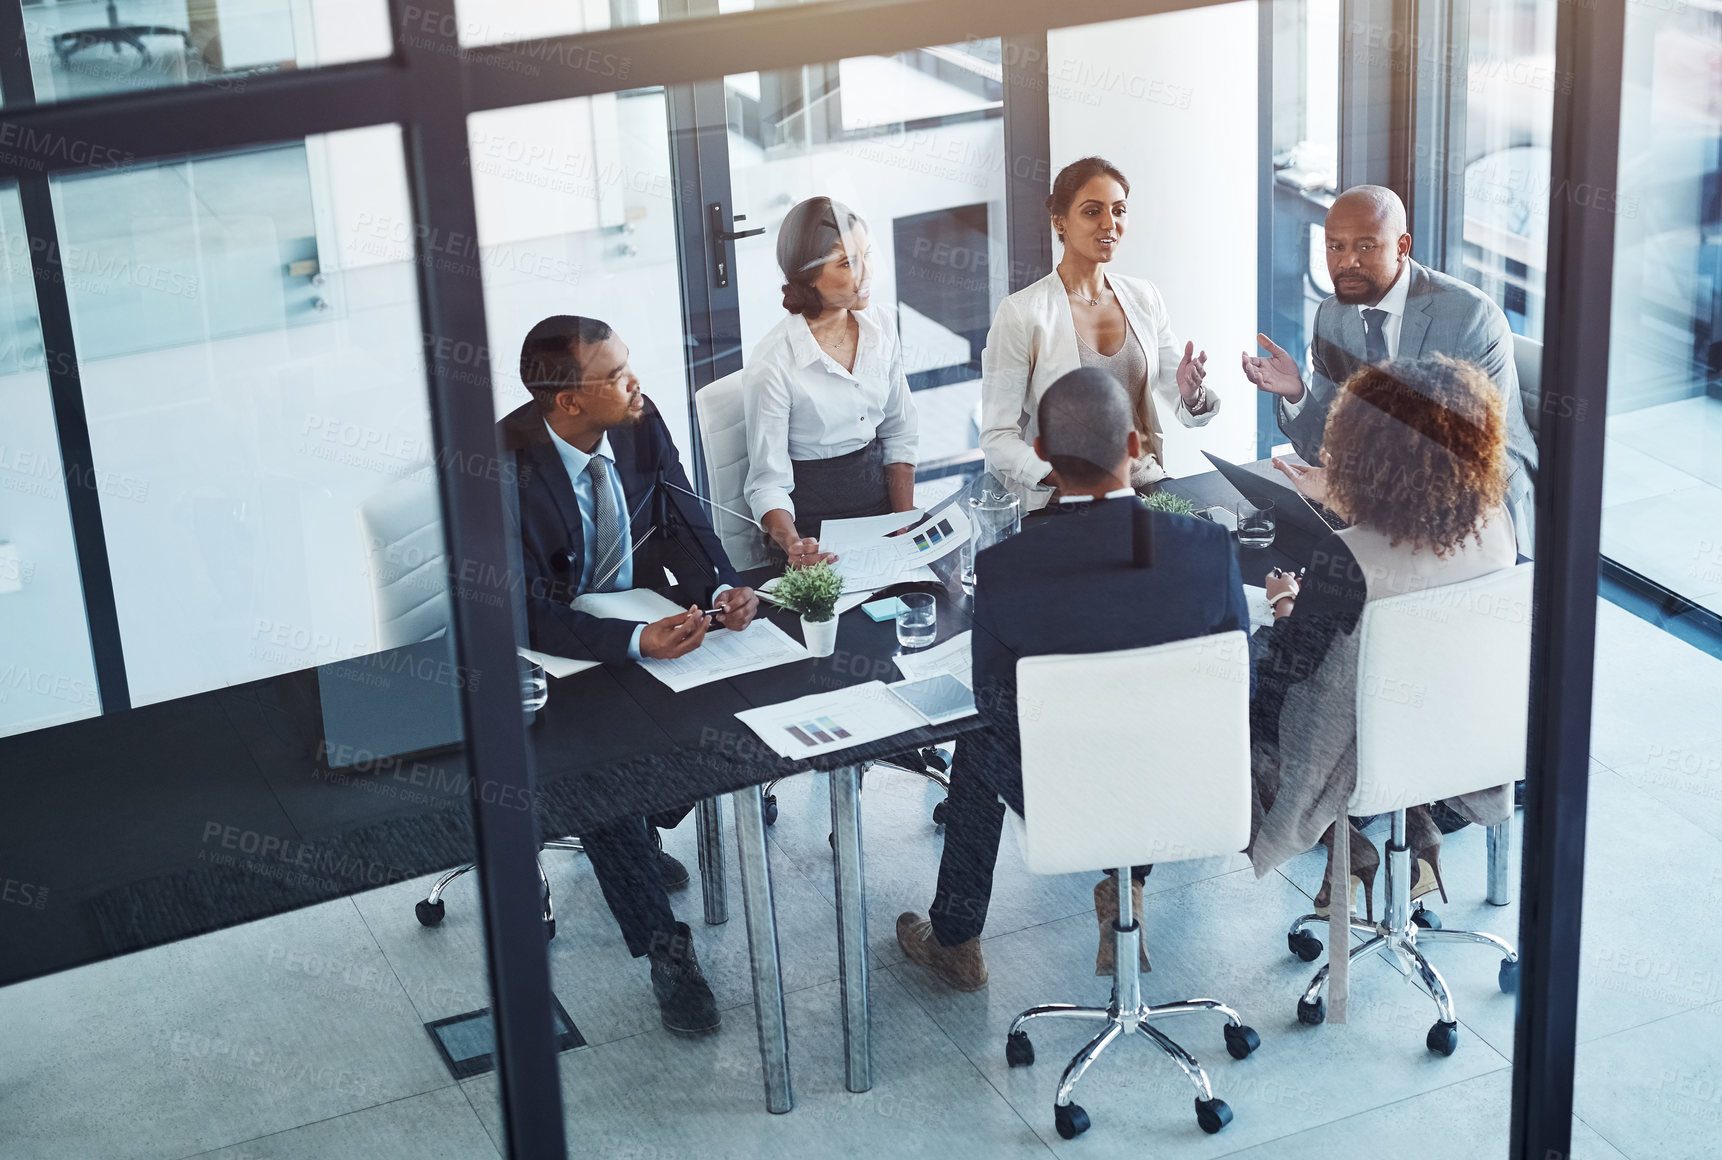 Buy stock photo Conversation, business people and team in a meeting for discussion, brainstorming or planning in office. Teamwork, group and corporate colleagues working on a project together in workplace boardroom.